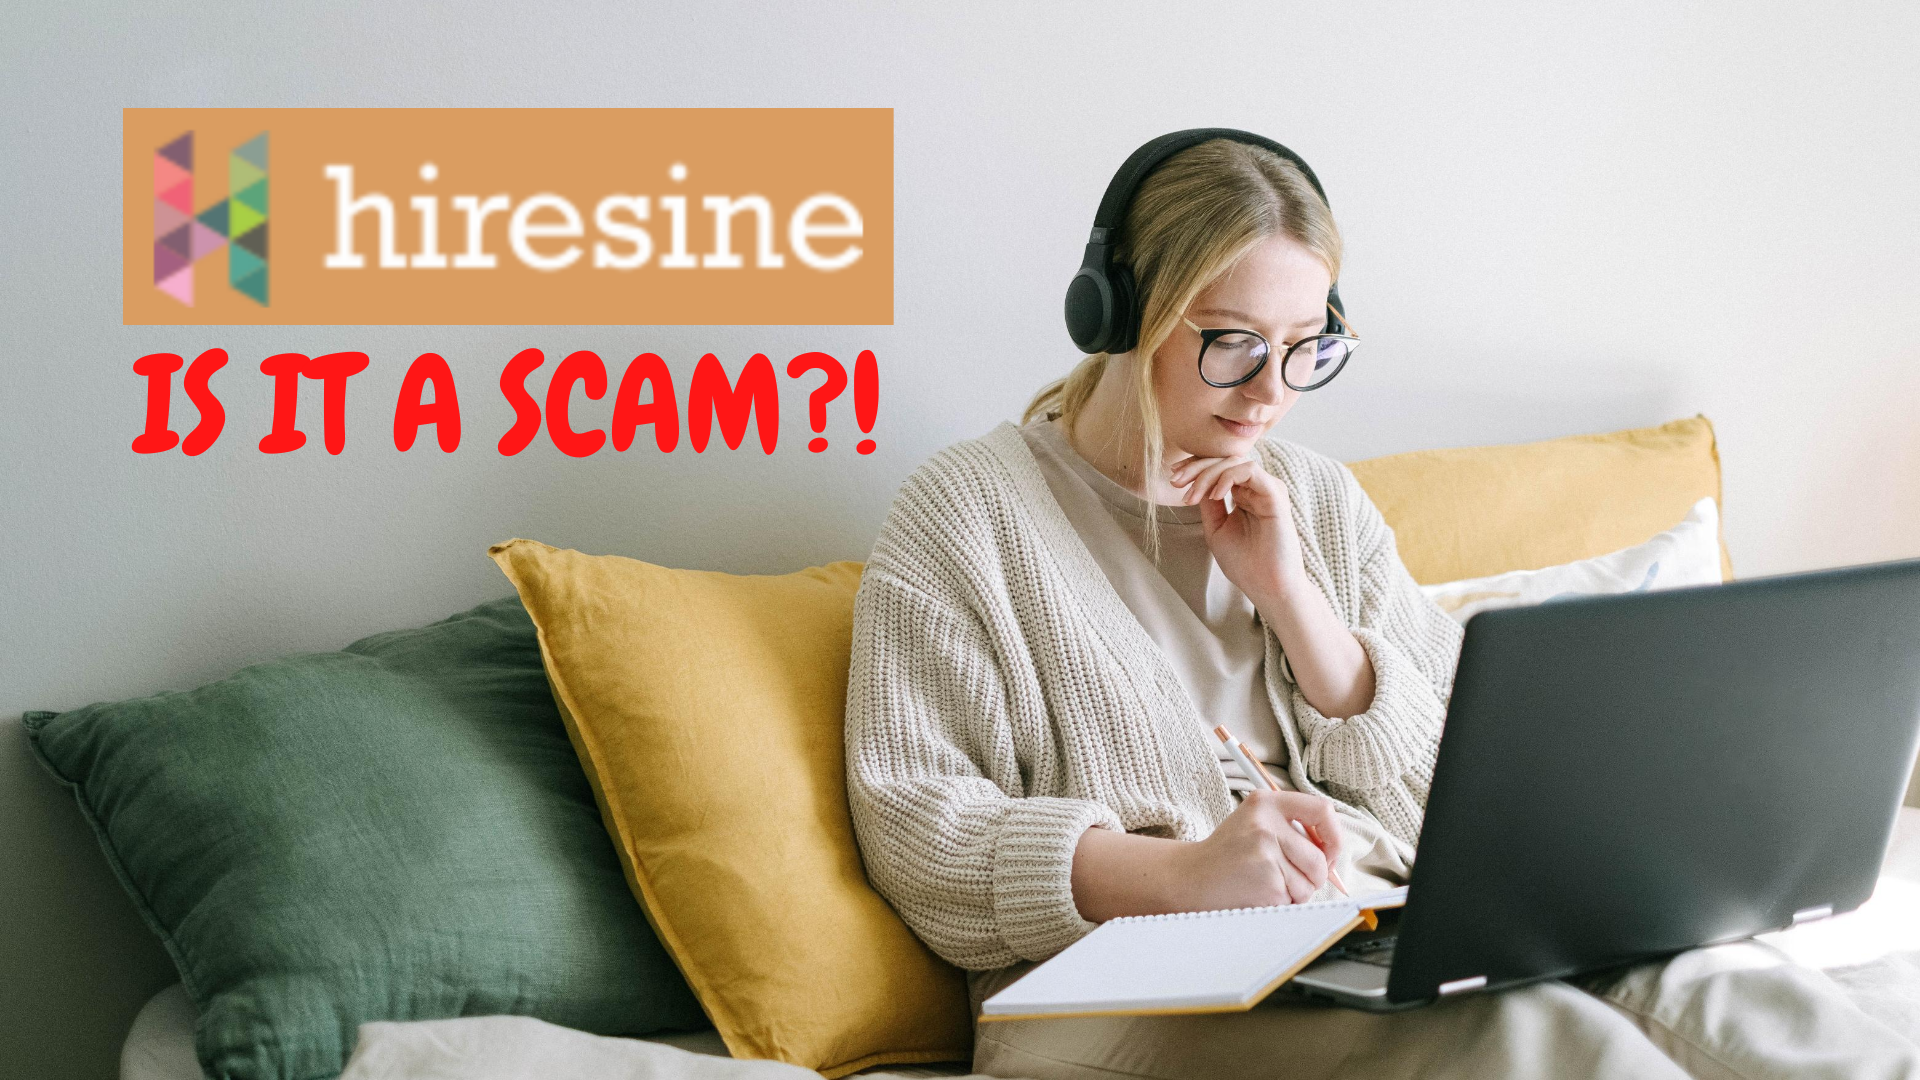 Is Hiresine a scam